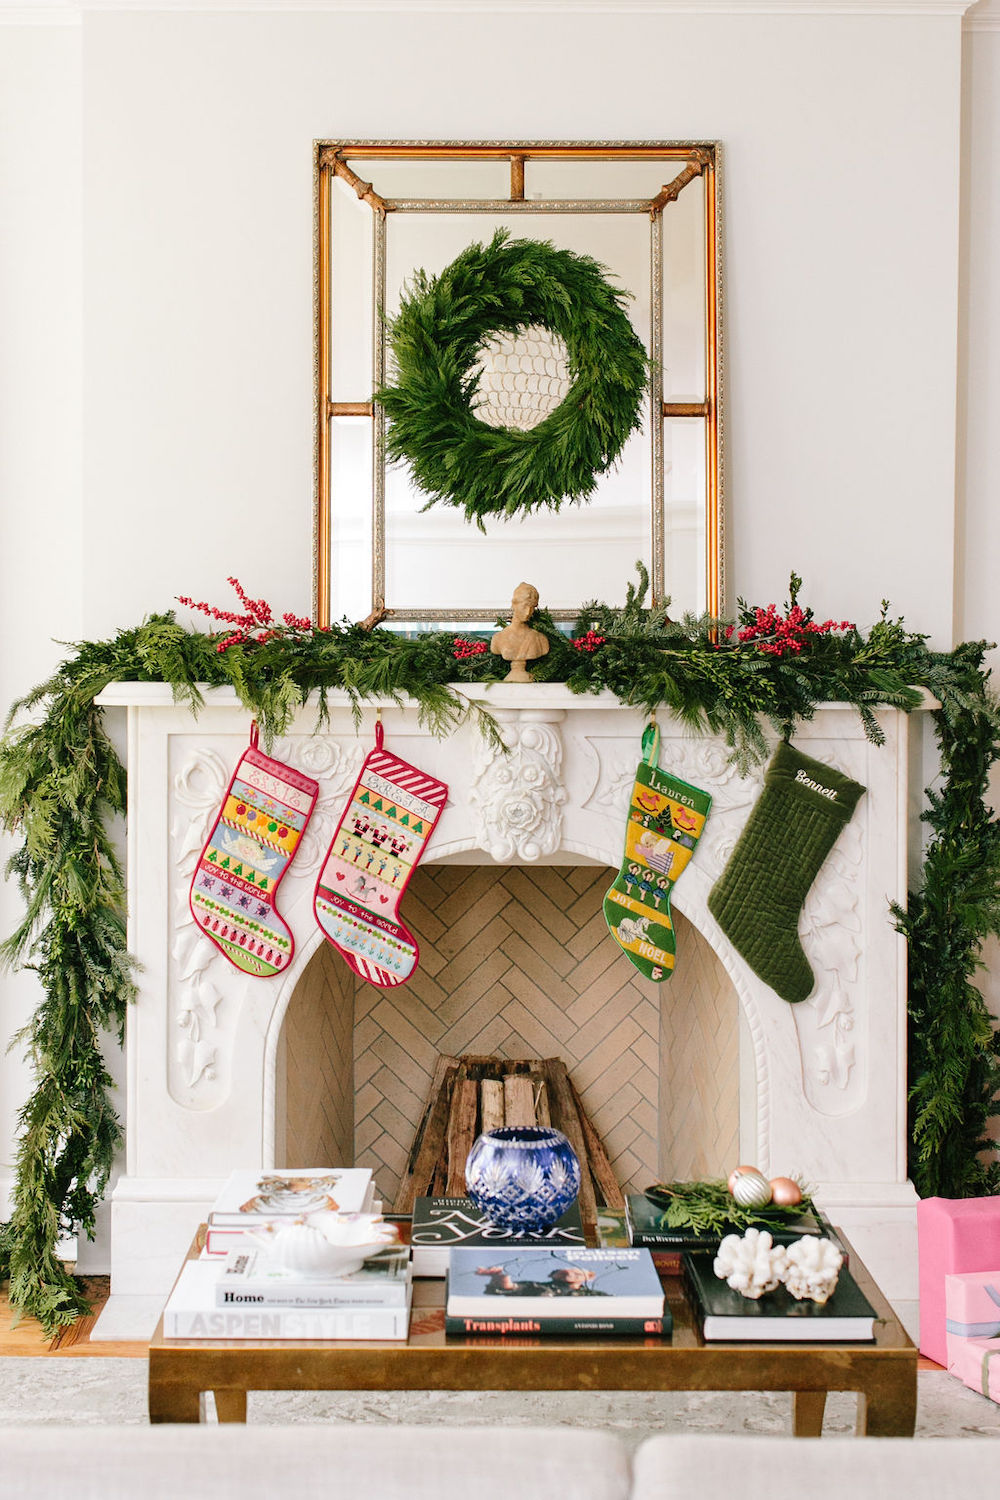 stone mantle with holiday decor and stockings